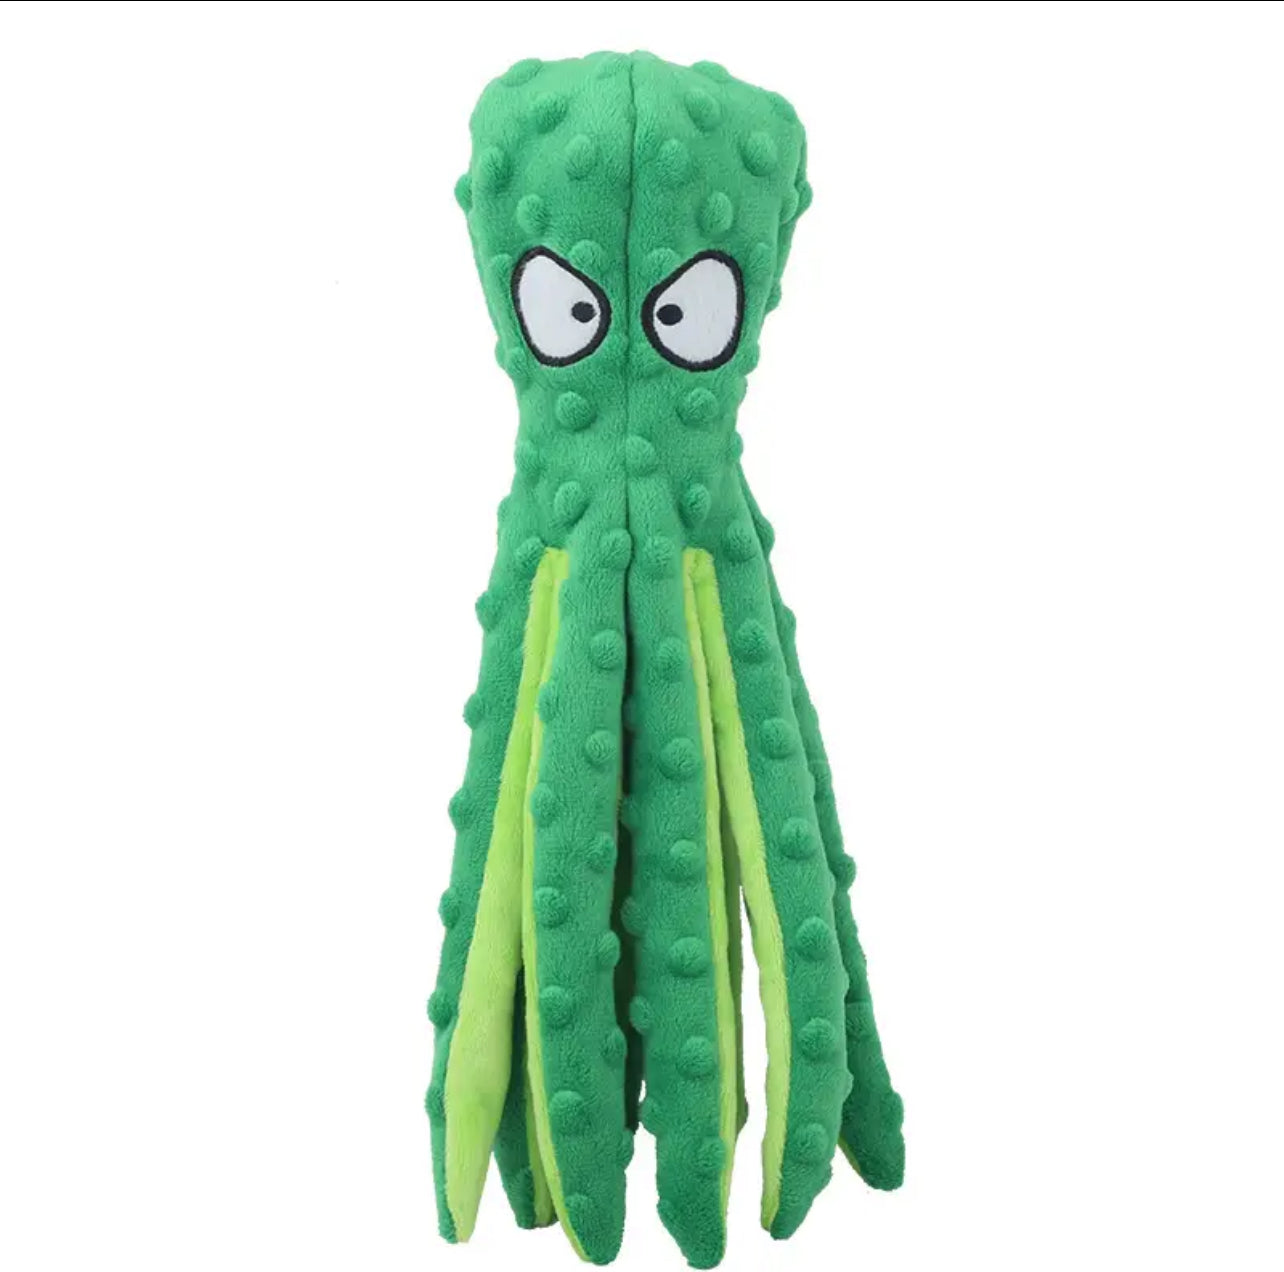 Mr. Octopus Soft Toy